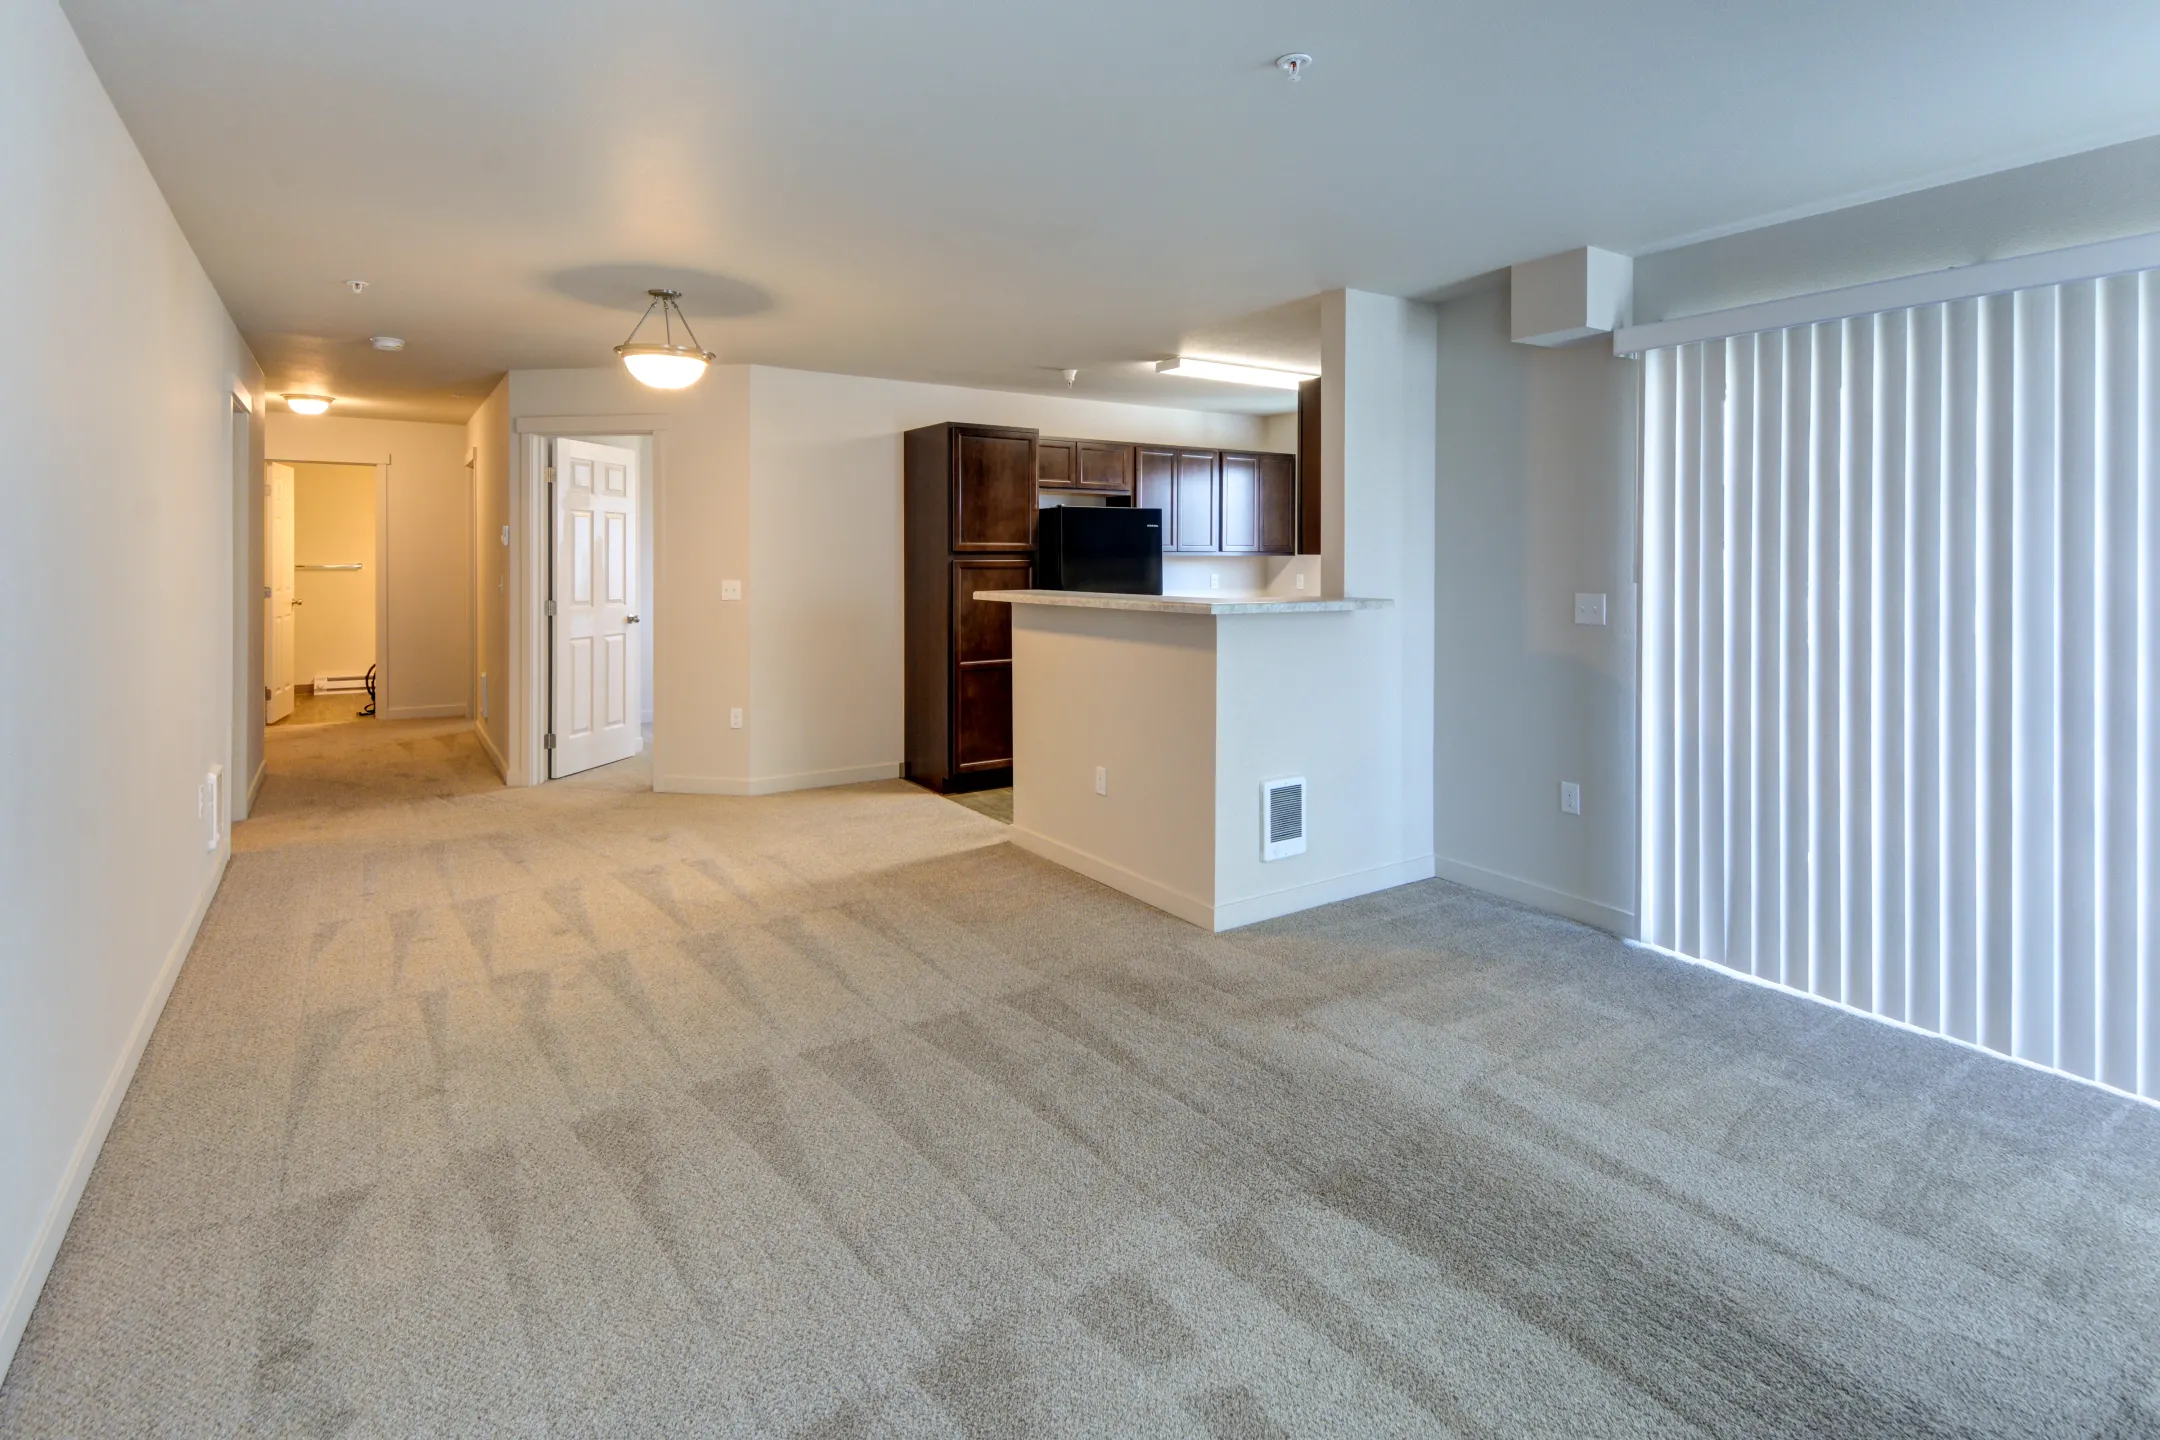 Living Room - Crown Pointe Apartments - Post Falls, ID